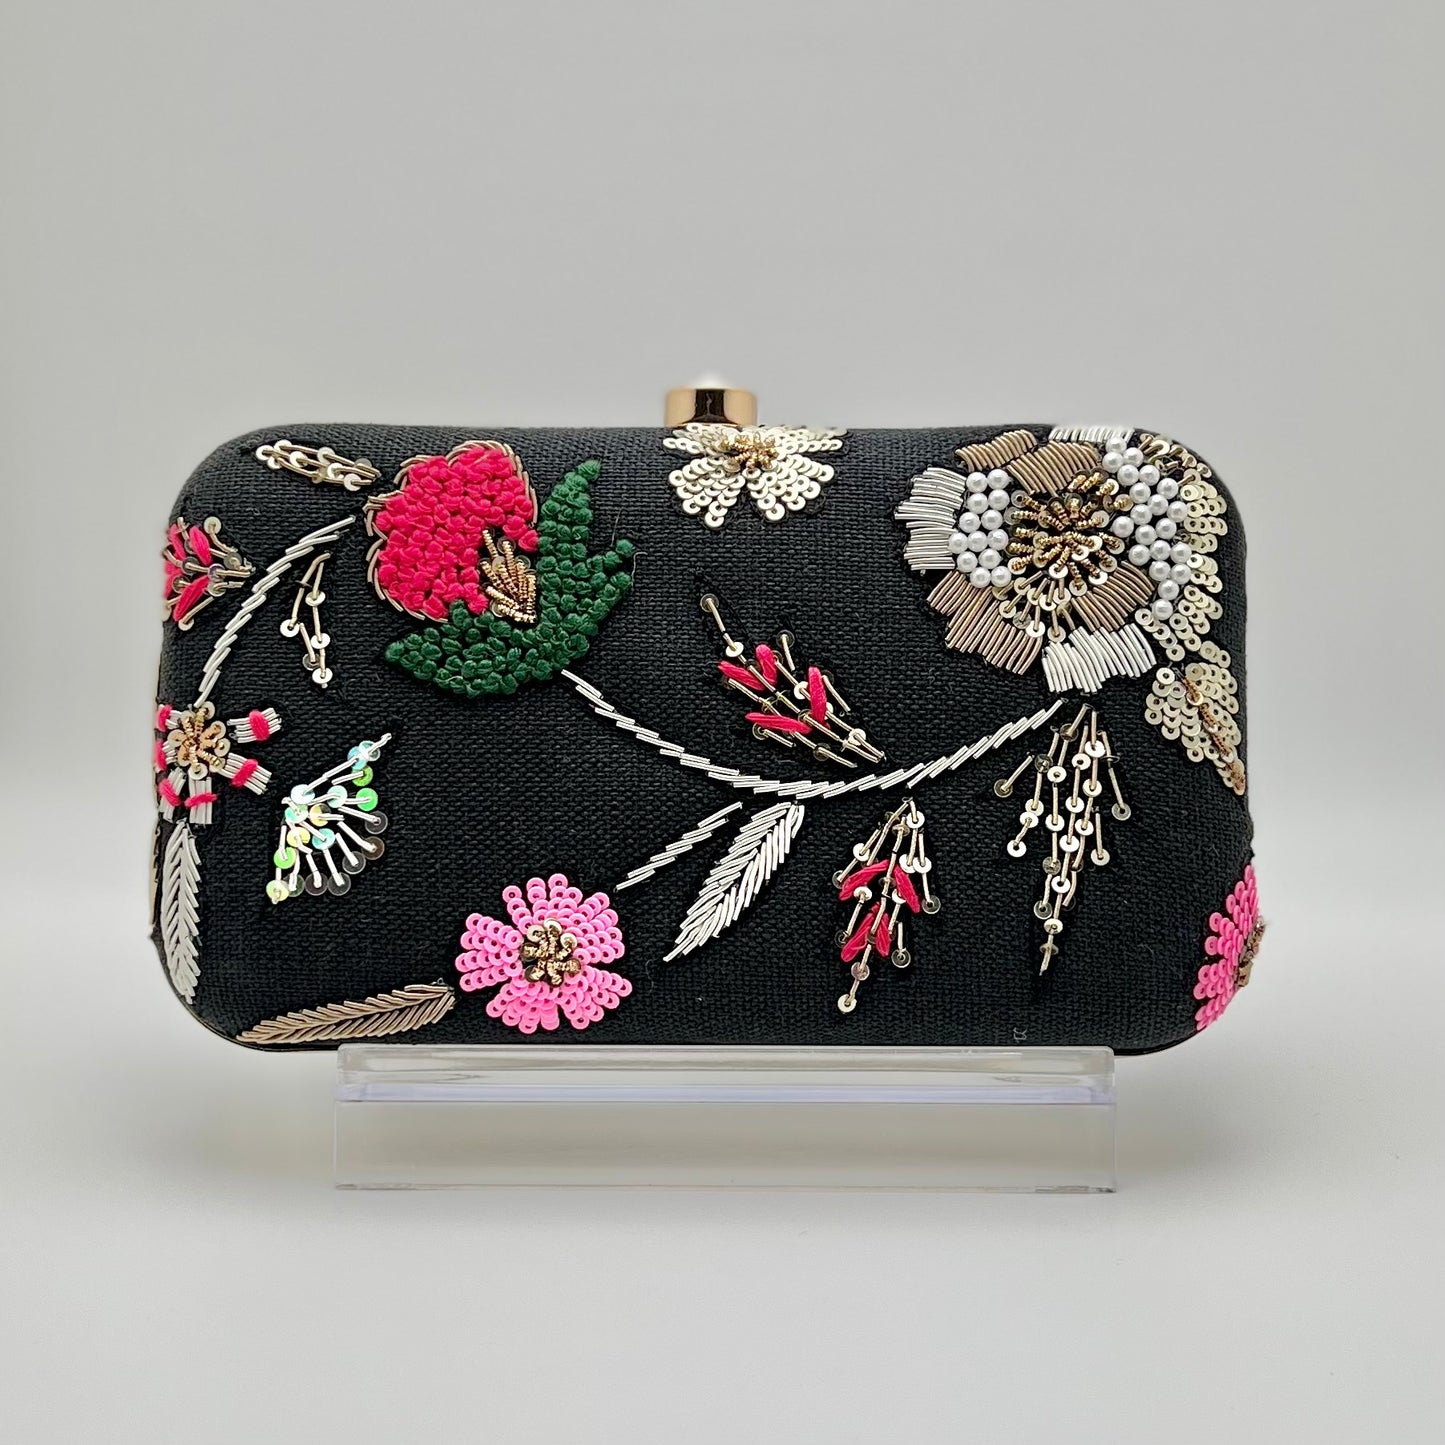 Zardozi and Dabka hand work classic clutch in black wash color. The bag also features a detachable chain so that it can be worn on the shoulder as a sling.